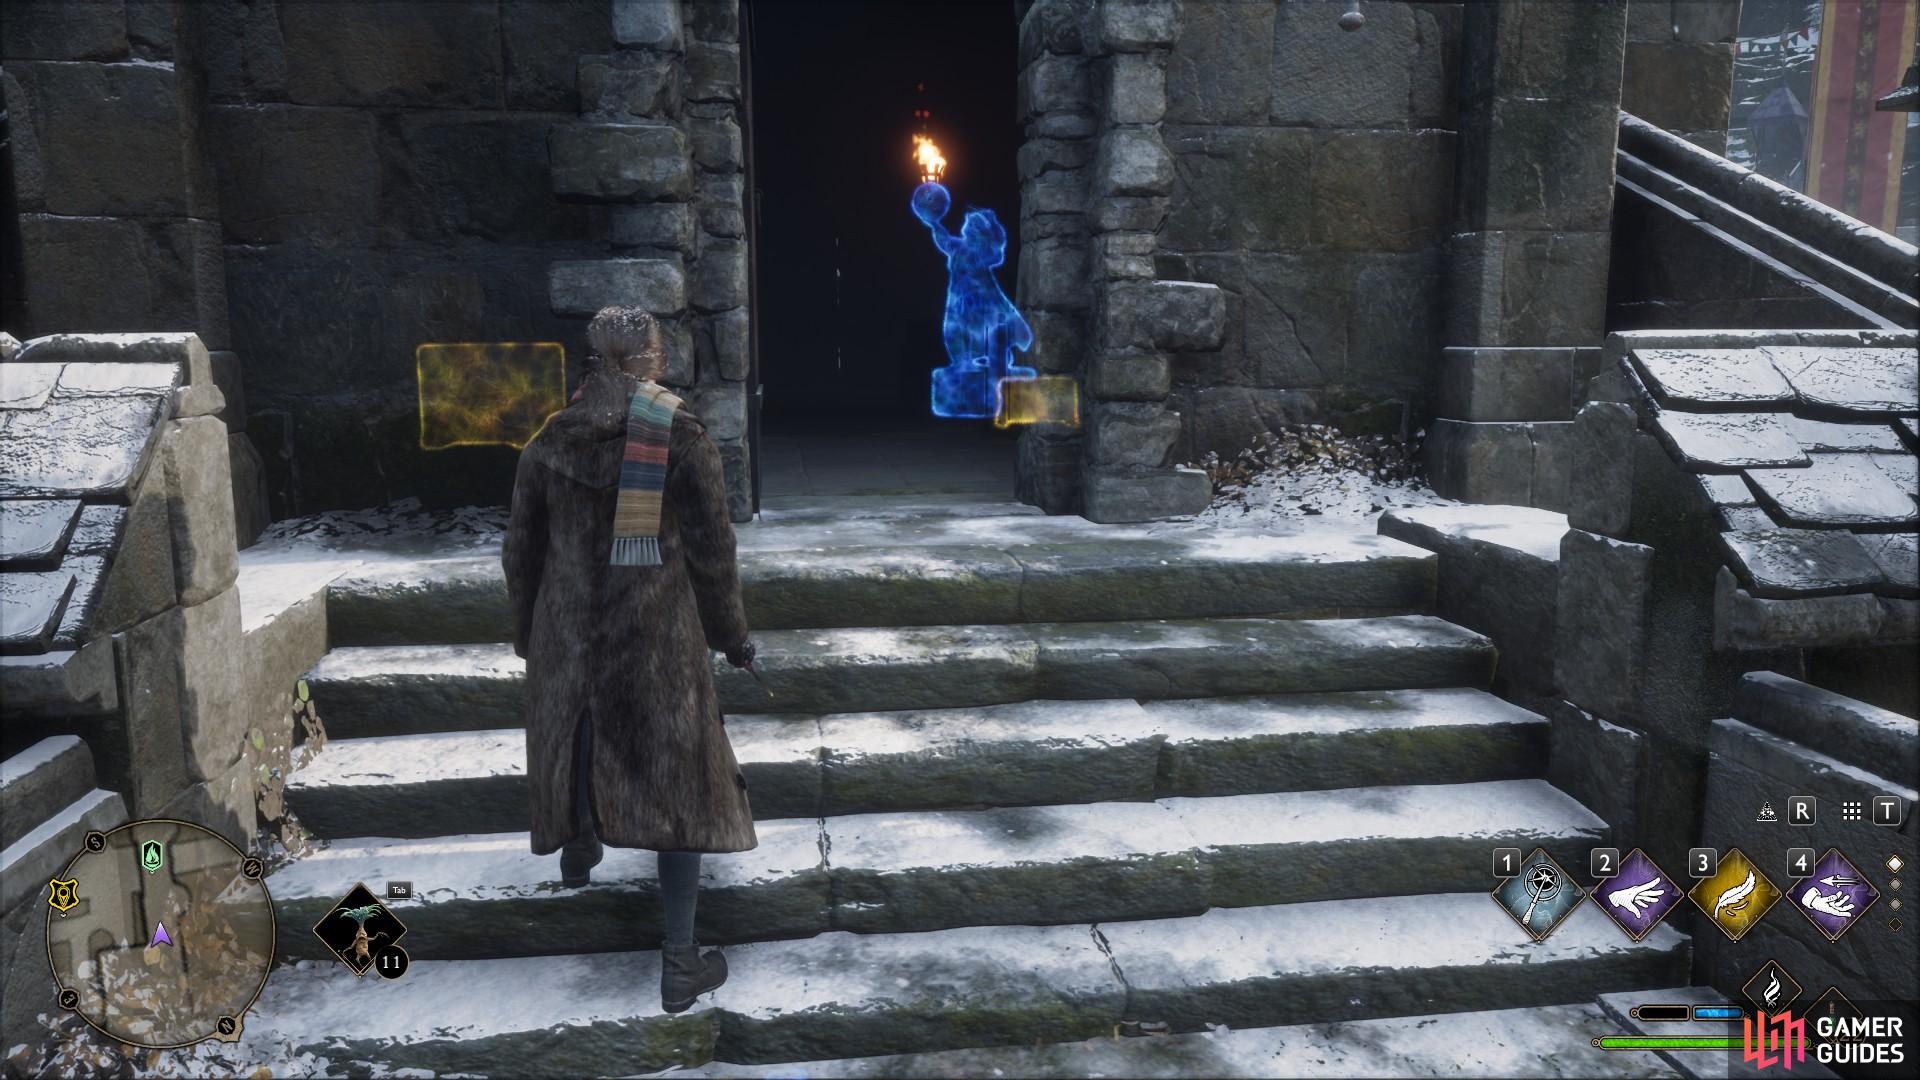 Head directly above the North Exit Floo Flame, pick the door, then Levioso the statue.